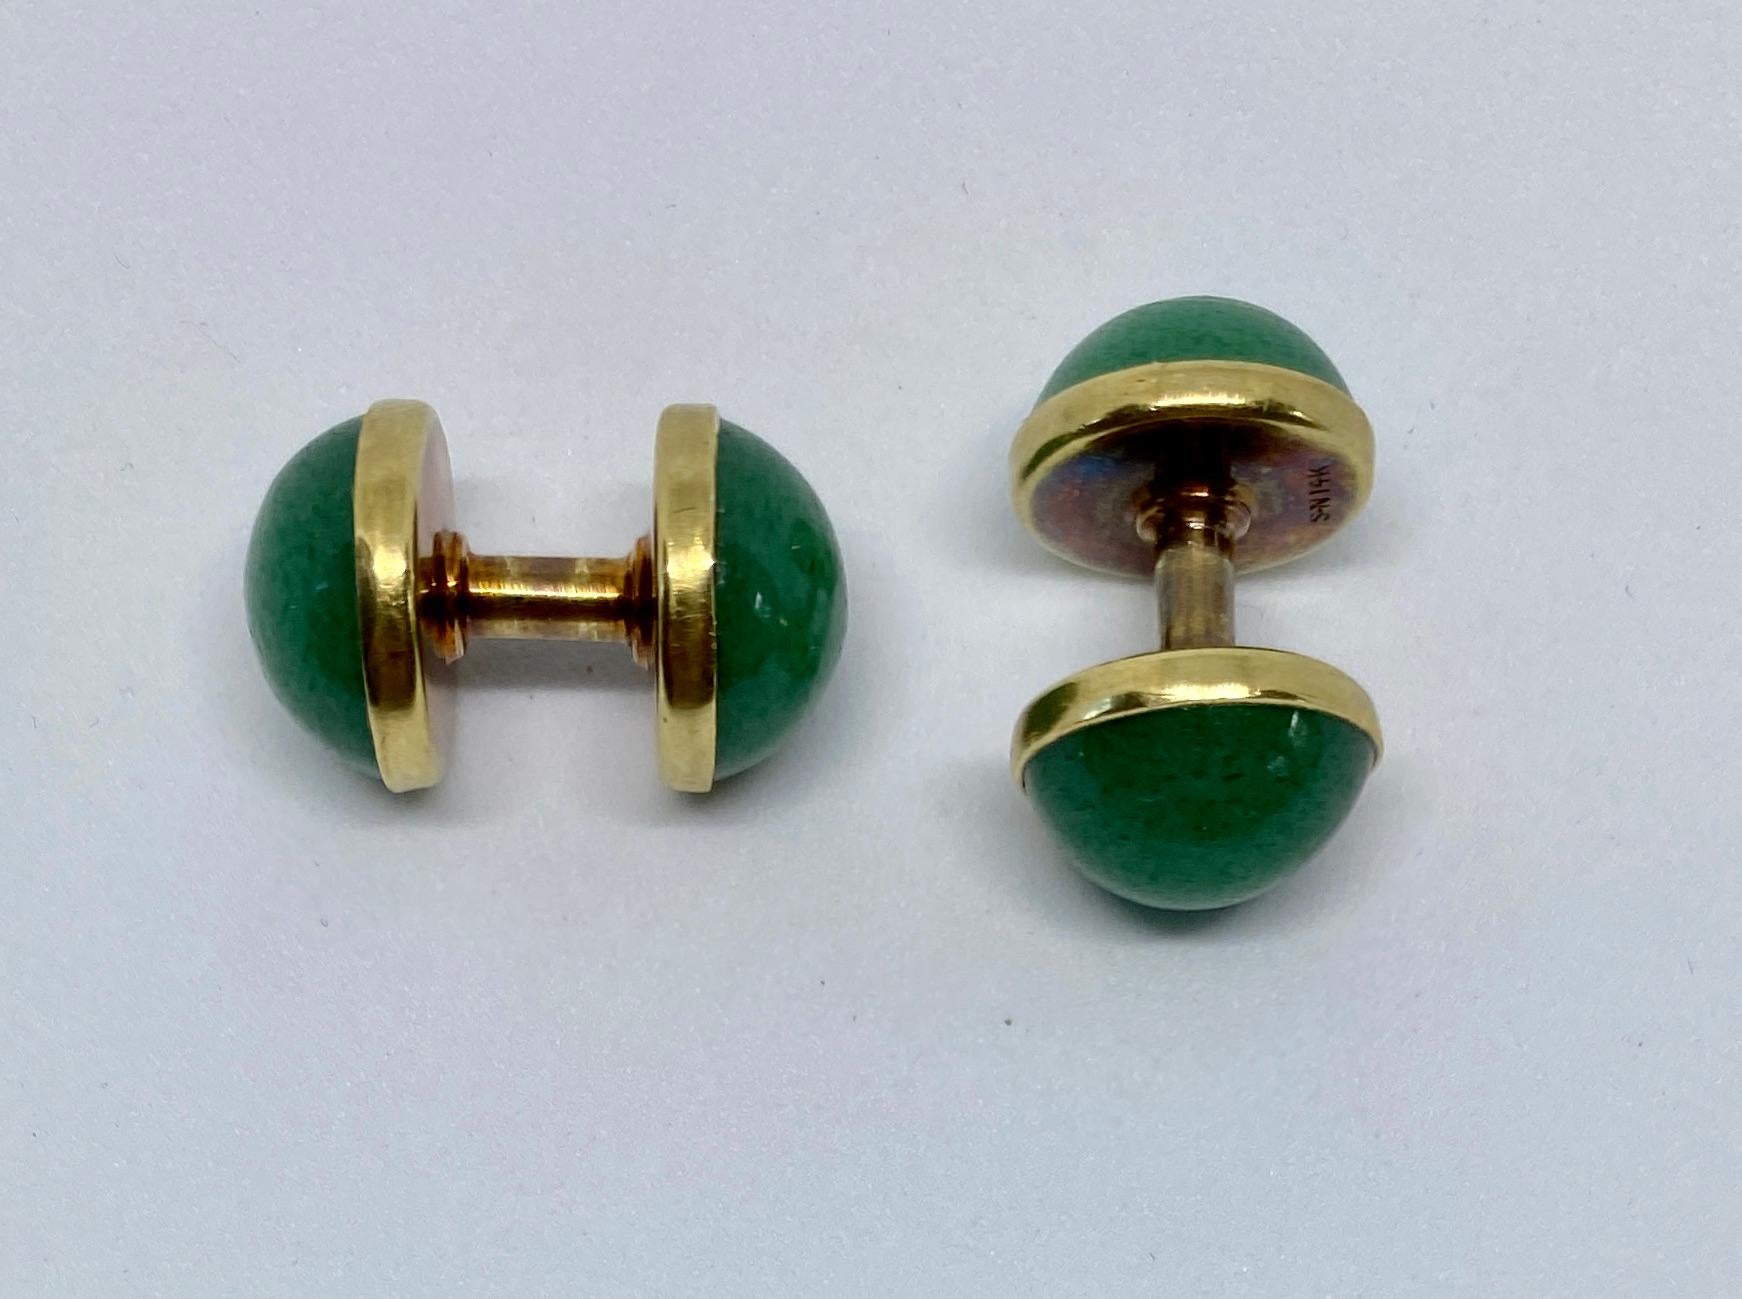 Fantastic, extremely rare cufflinks featuring green aventurine cabochons set in 14K yellow gold by Sansbury & Nellis, a top American producer of jewelry from the Art Deco era.

Spool-style cufflinks are very easy to put on and remove - essentially,